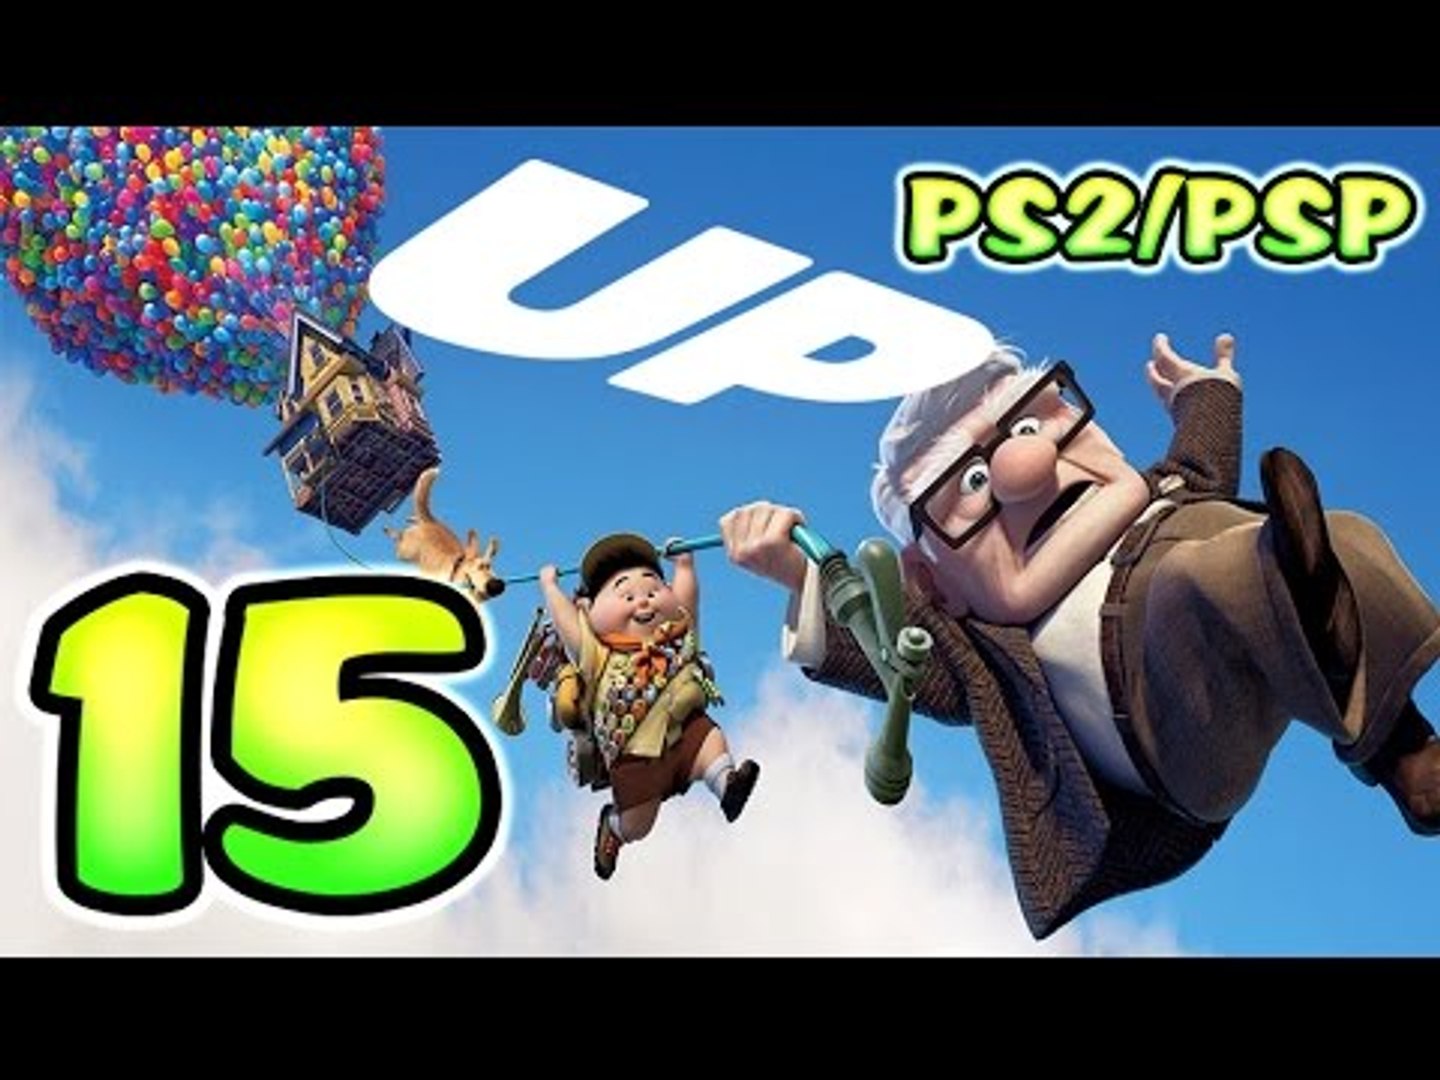 Up! PS2